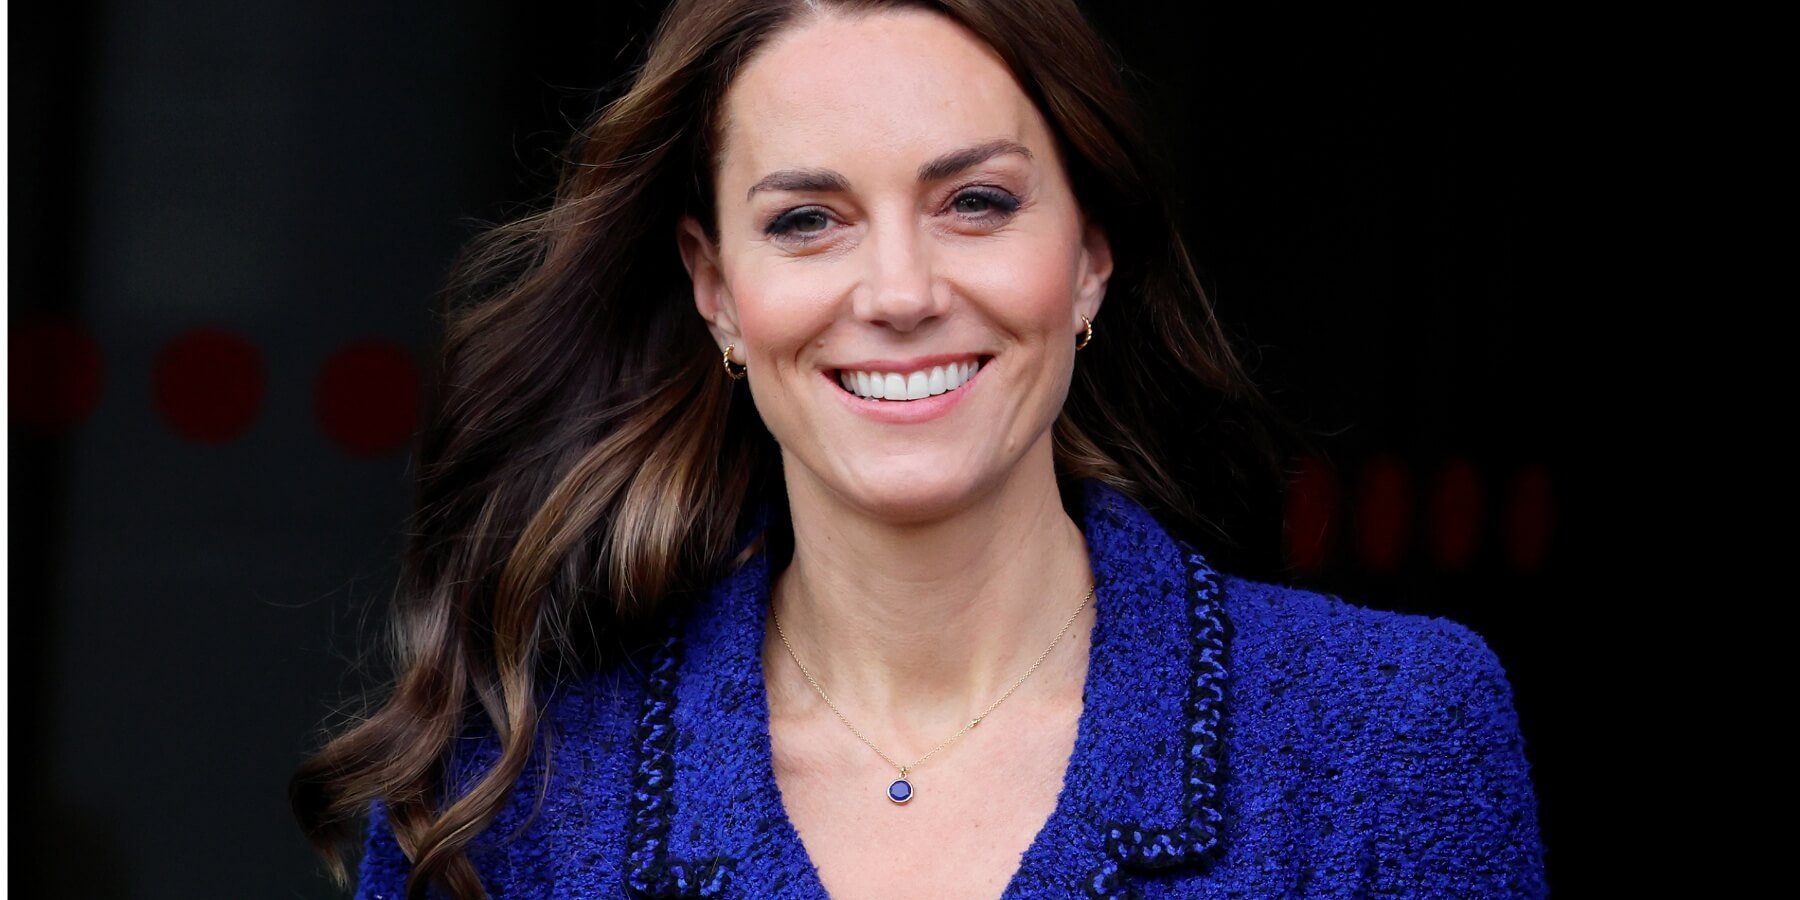 According to a royal commentator, Kate Middleton should have been more open about her health struggles.